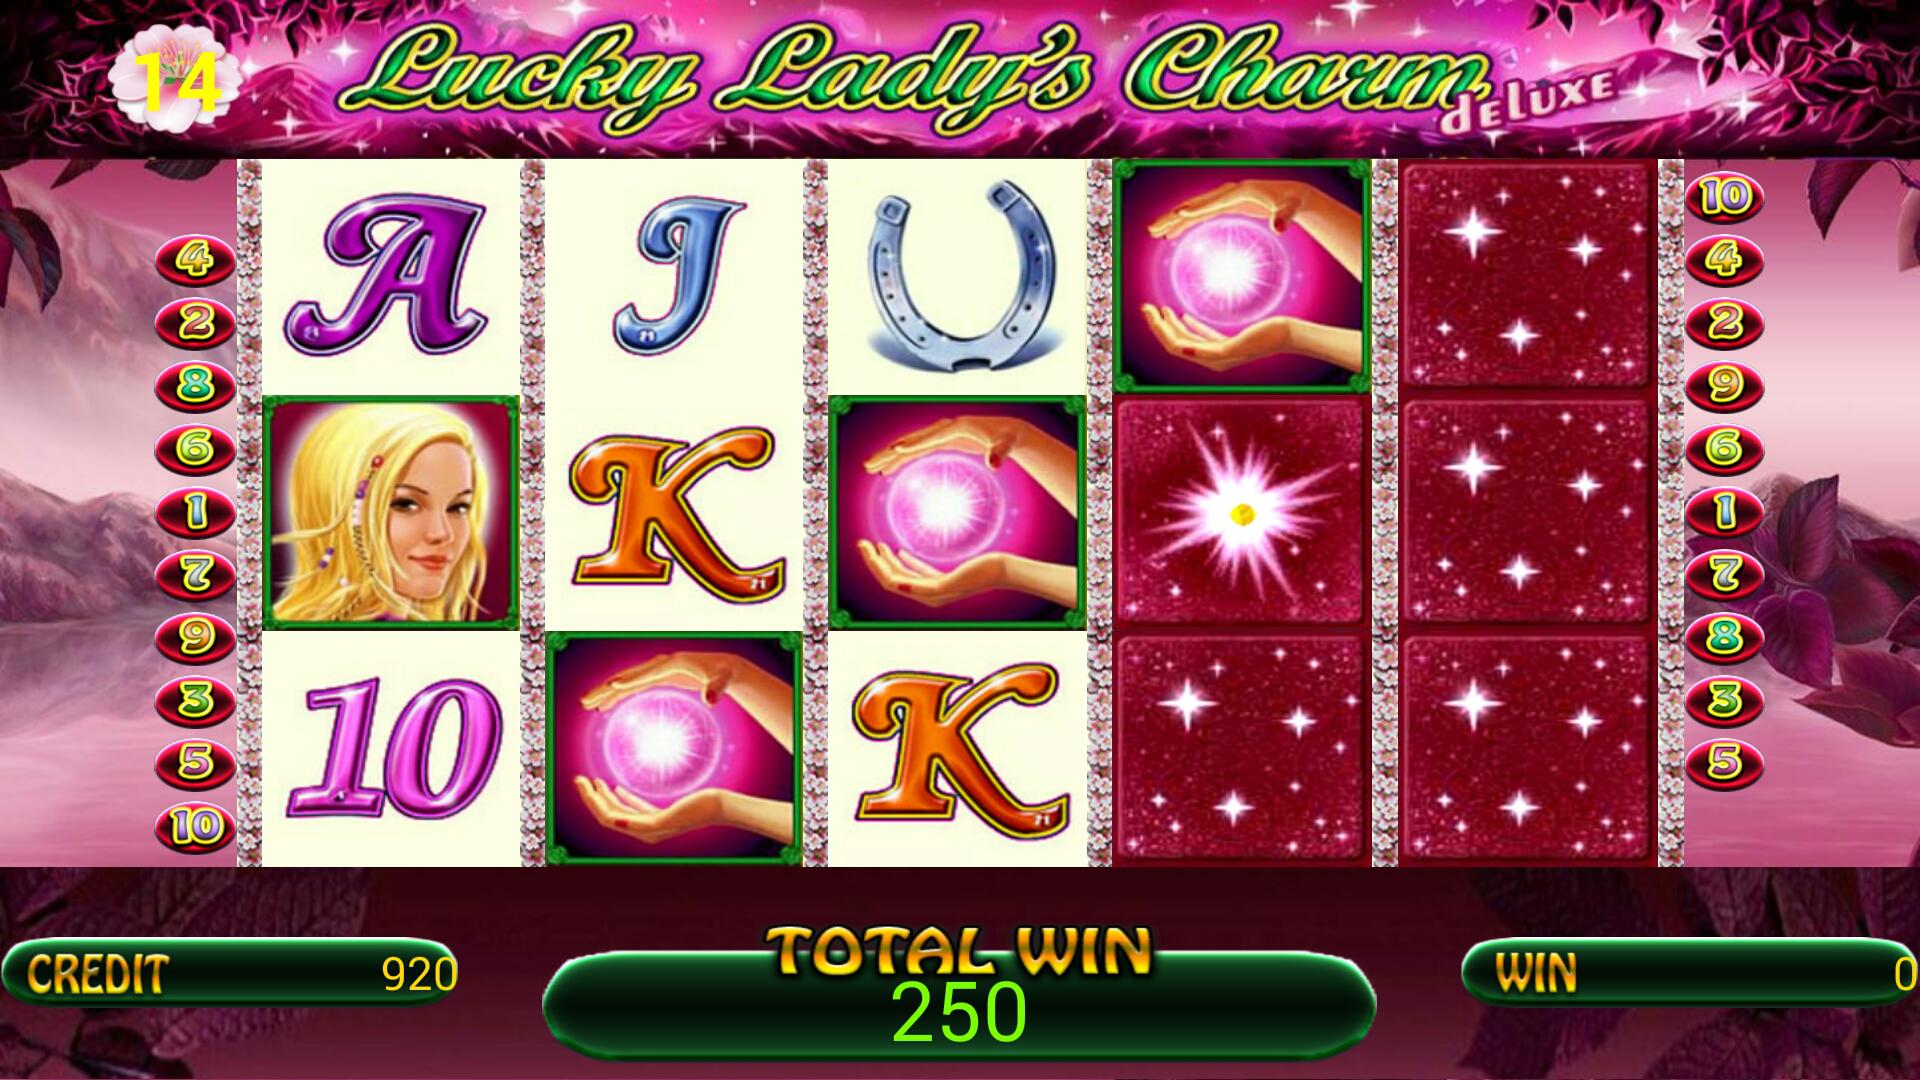 Lady Luck Charm Free Slots